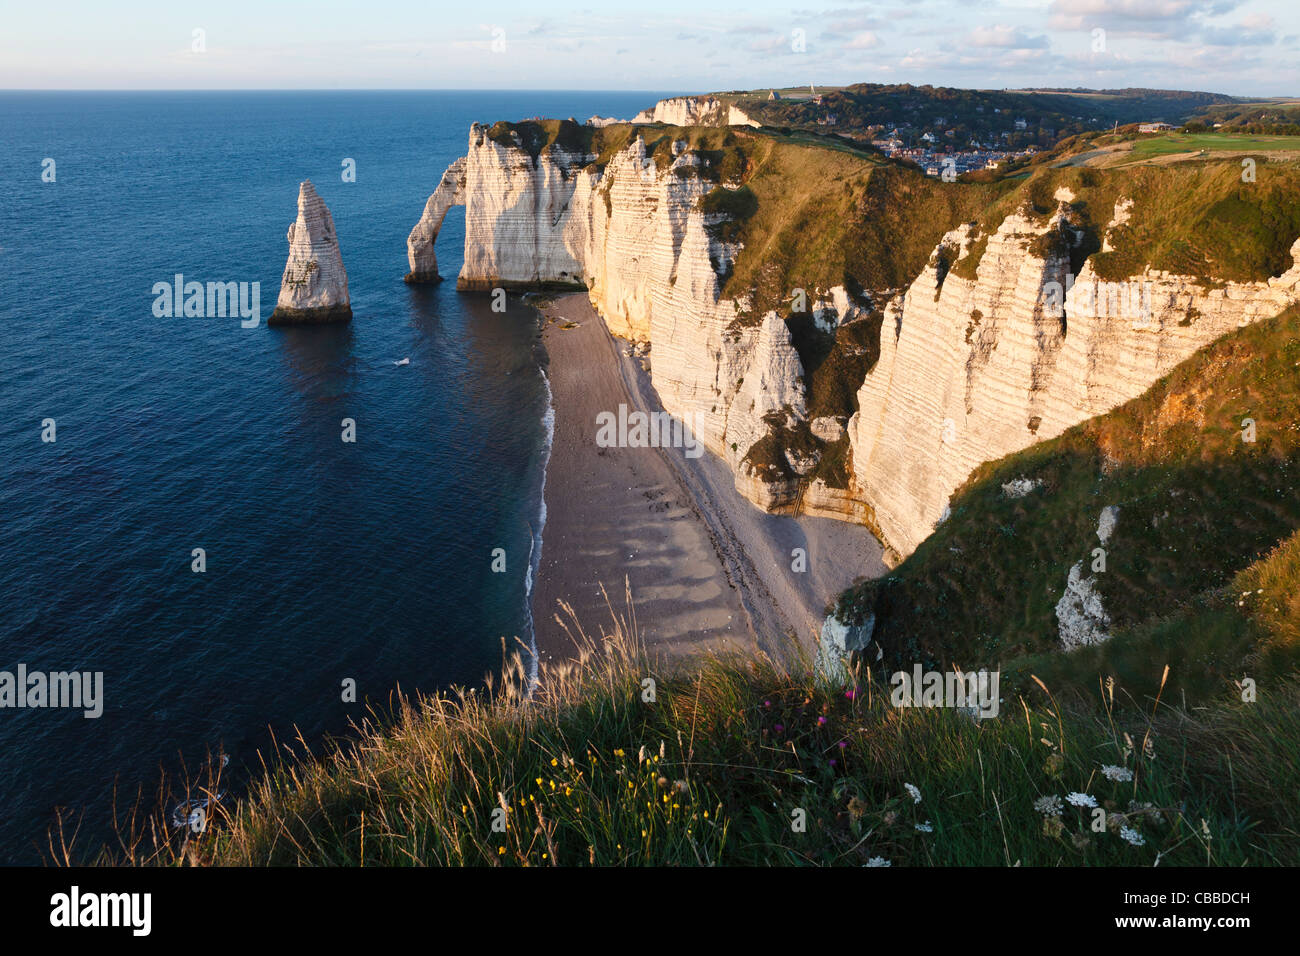 L'Aiguille (the Needle) and Porte d'Aval at Etretat, Normandy, France Stock Photo